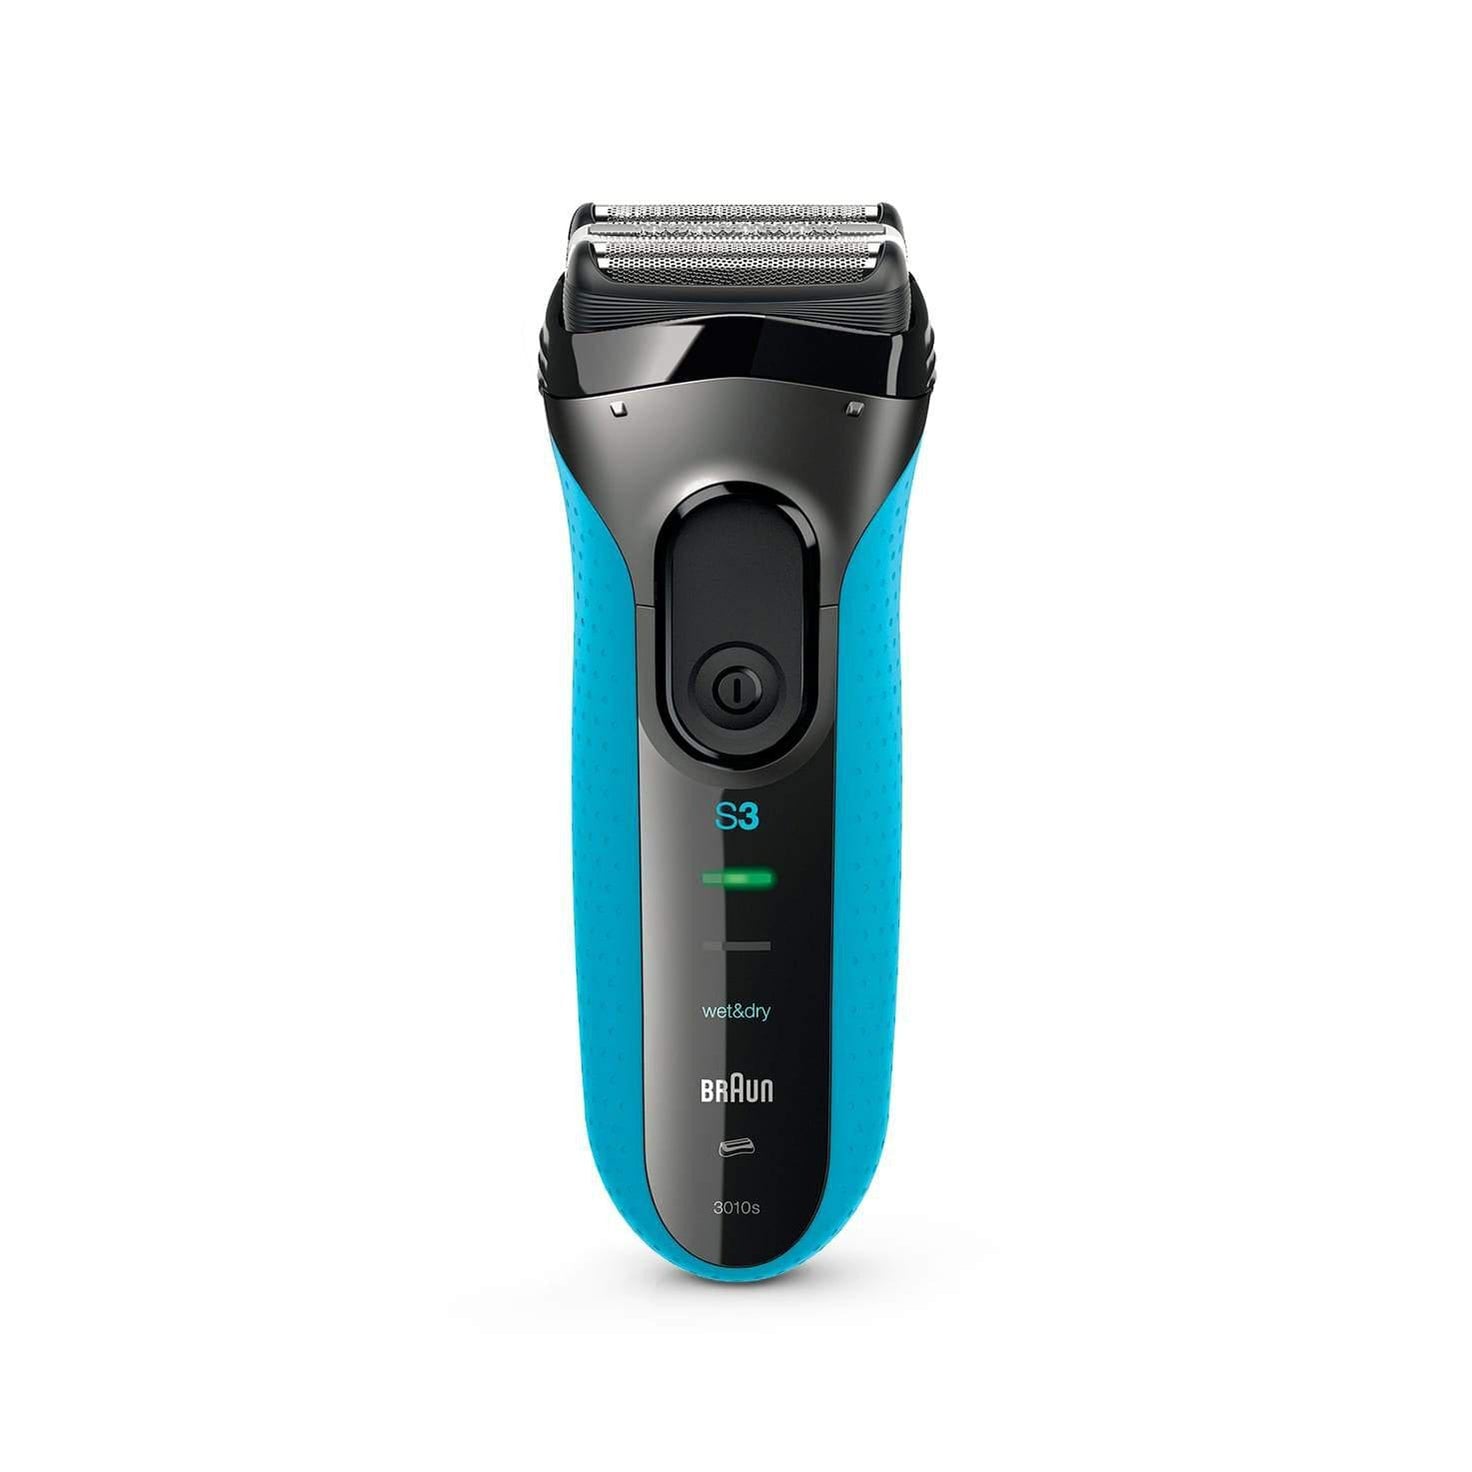 Braun Men's Series 3 ProSkin 3010s Wet and Dry Electric Shaver - Black/Blue - Healthxpress.ie